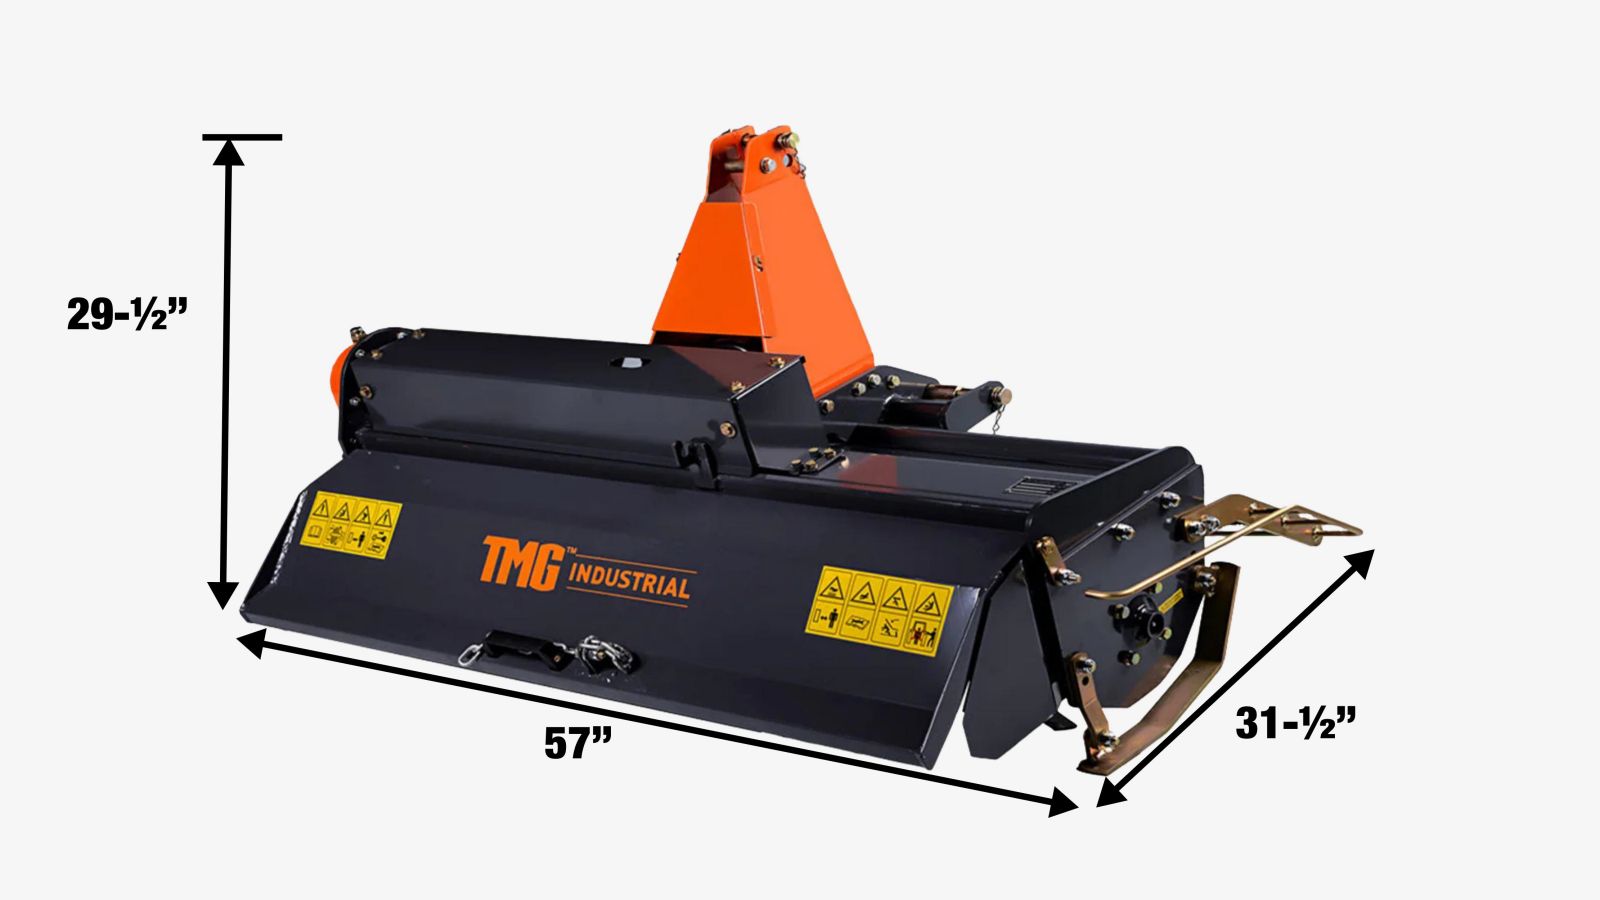 TMG Industrial 48” 3-Point Hitch Rotary Tiller, 18-30 HP Sub-Compact, 3-½” Tilling Depth, PTO Shaft Included, Category 1 Hookup, TMG-RT120-specifications-image